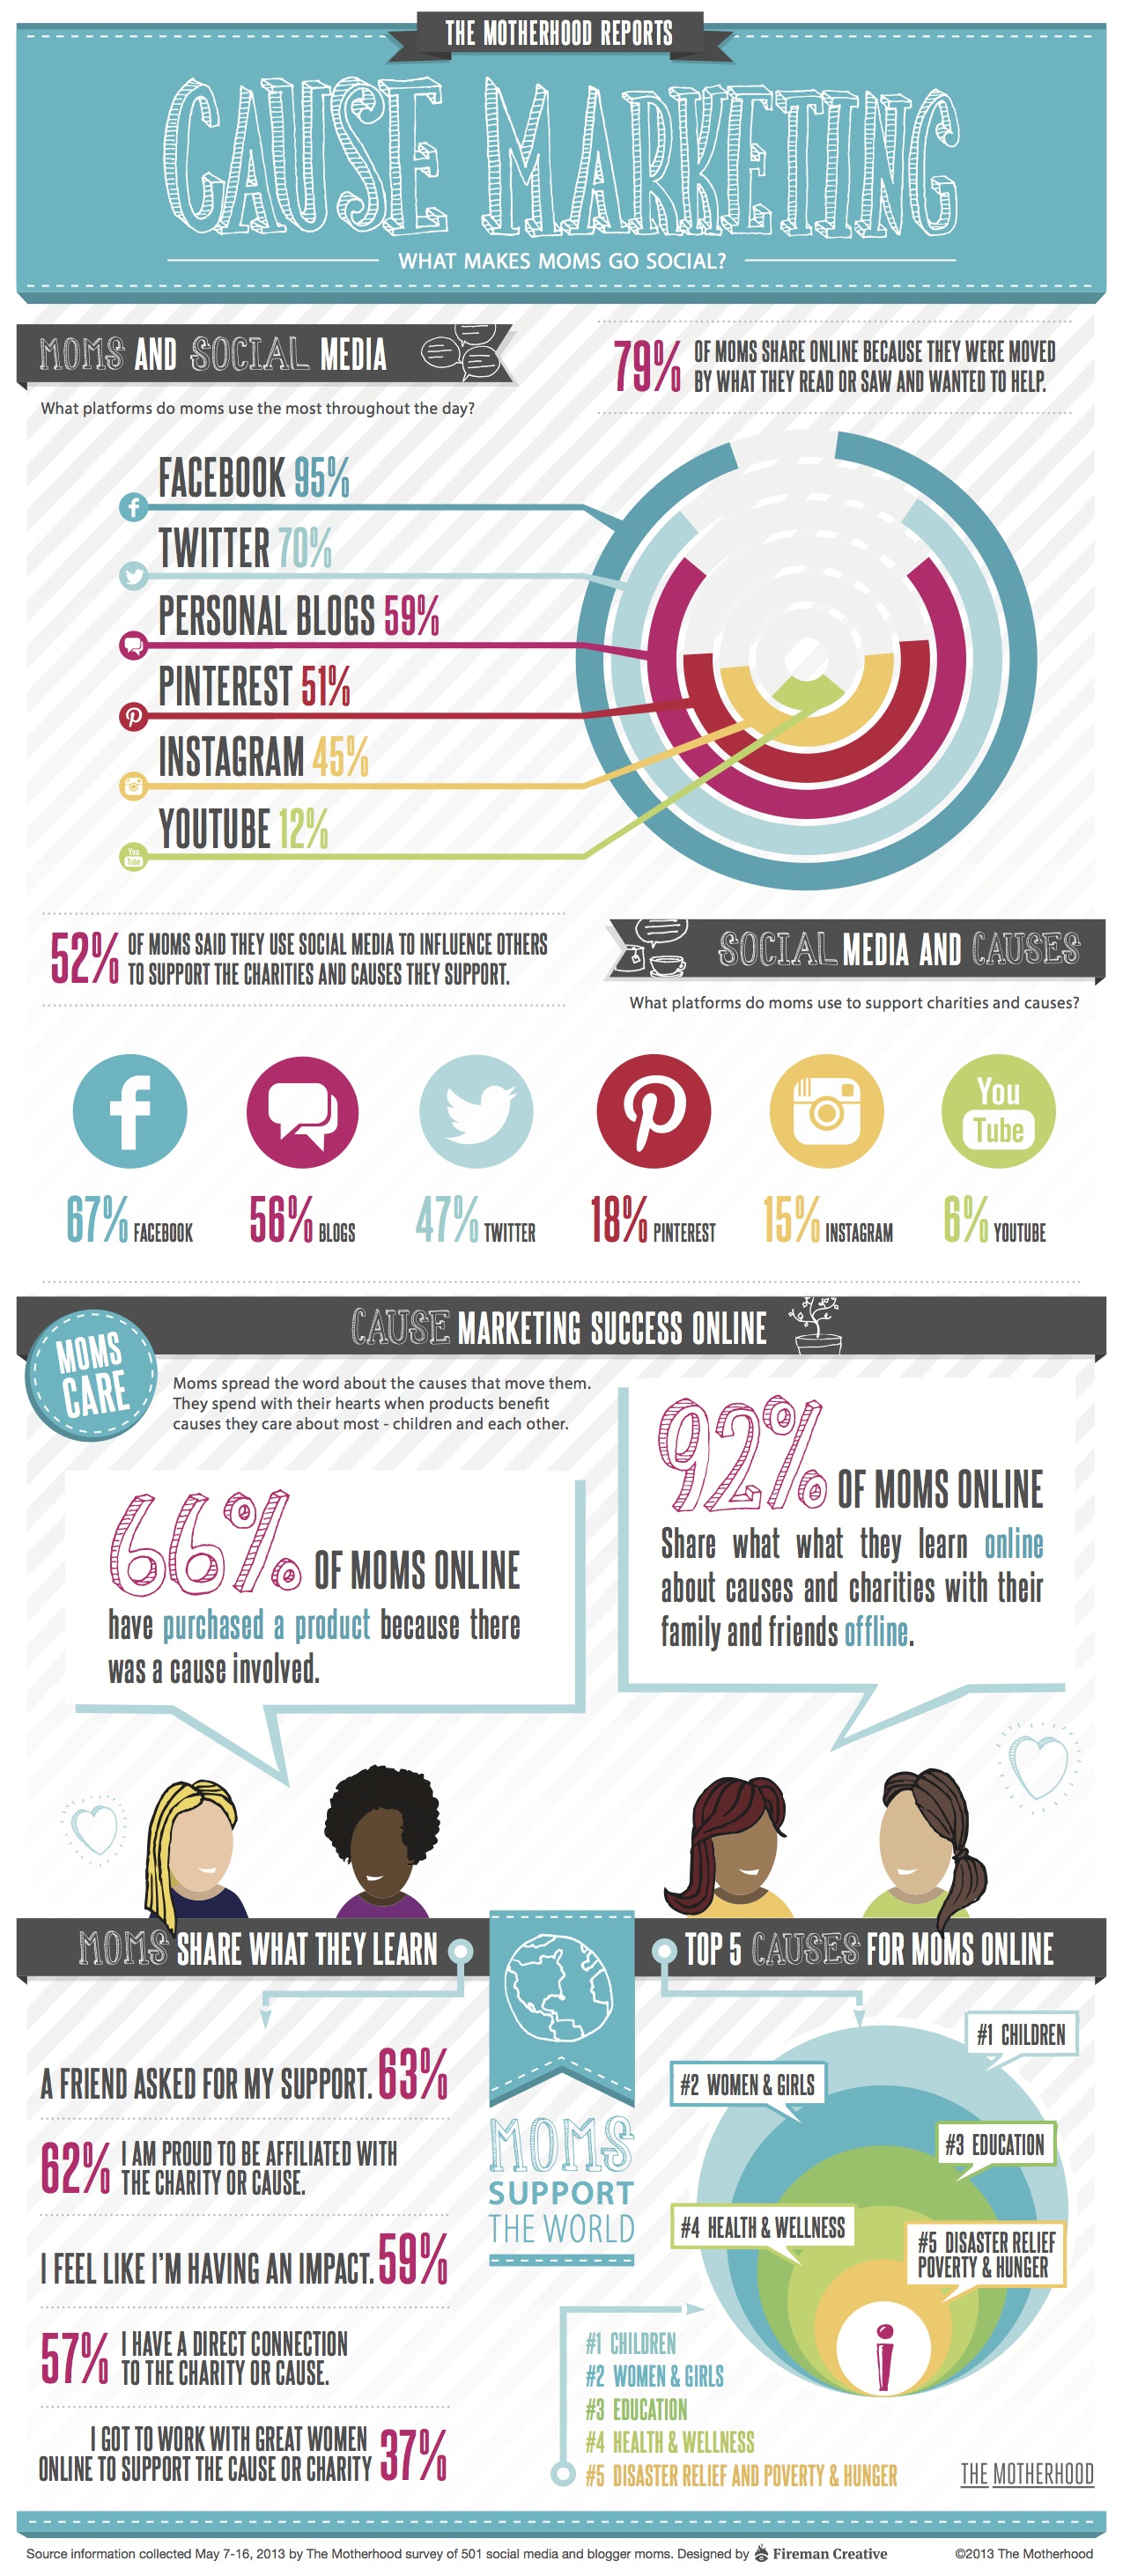 Cause Marketing: What Makes Moms Go Social (The Motherhood | A Social ...